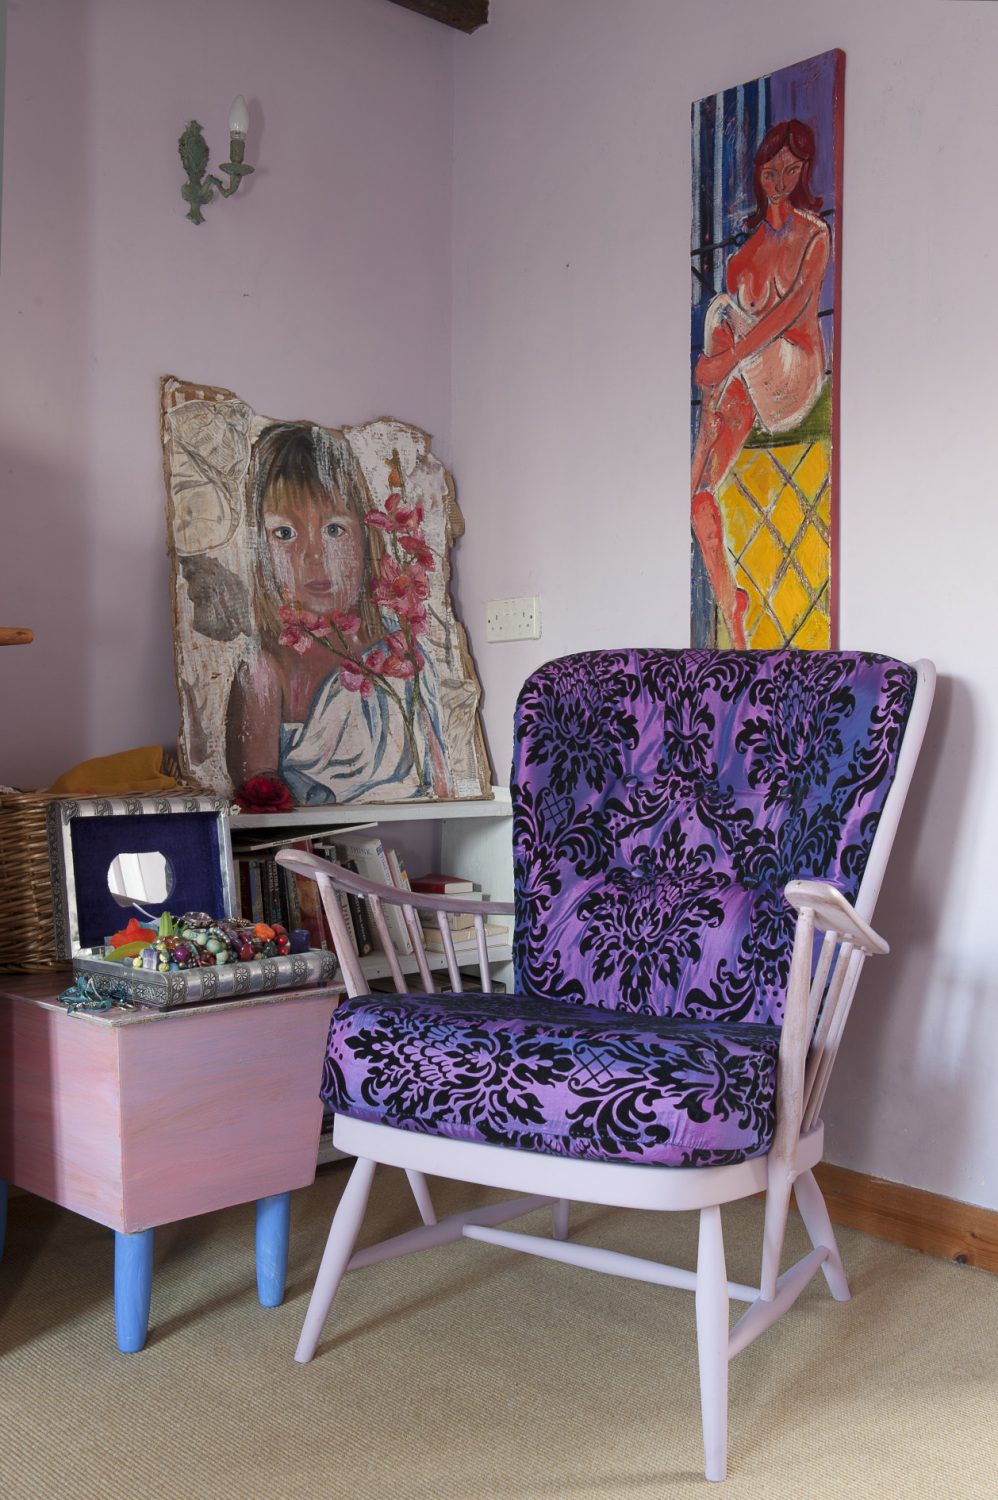 In one corner of Oeda’s bedroom, a wooden armchair is upholstered in striking mauve and black. On the walls are more pictures by her daughters and a nude by Kim Langford